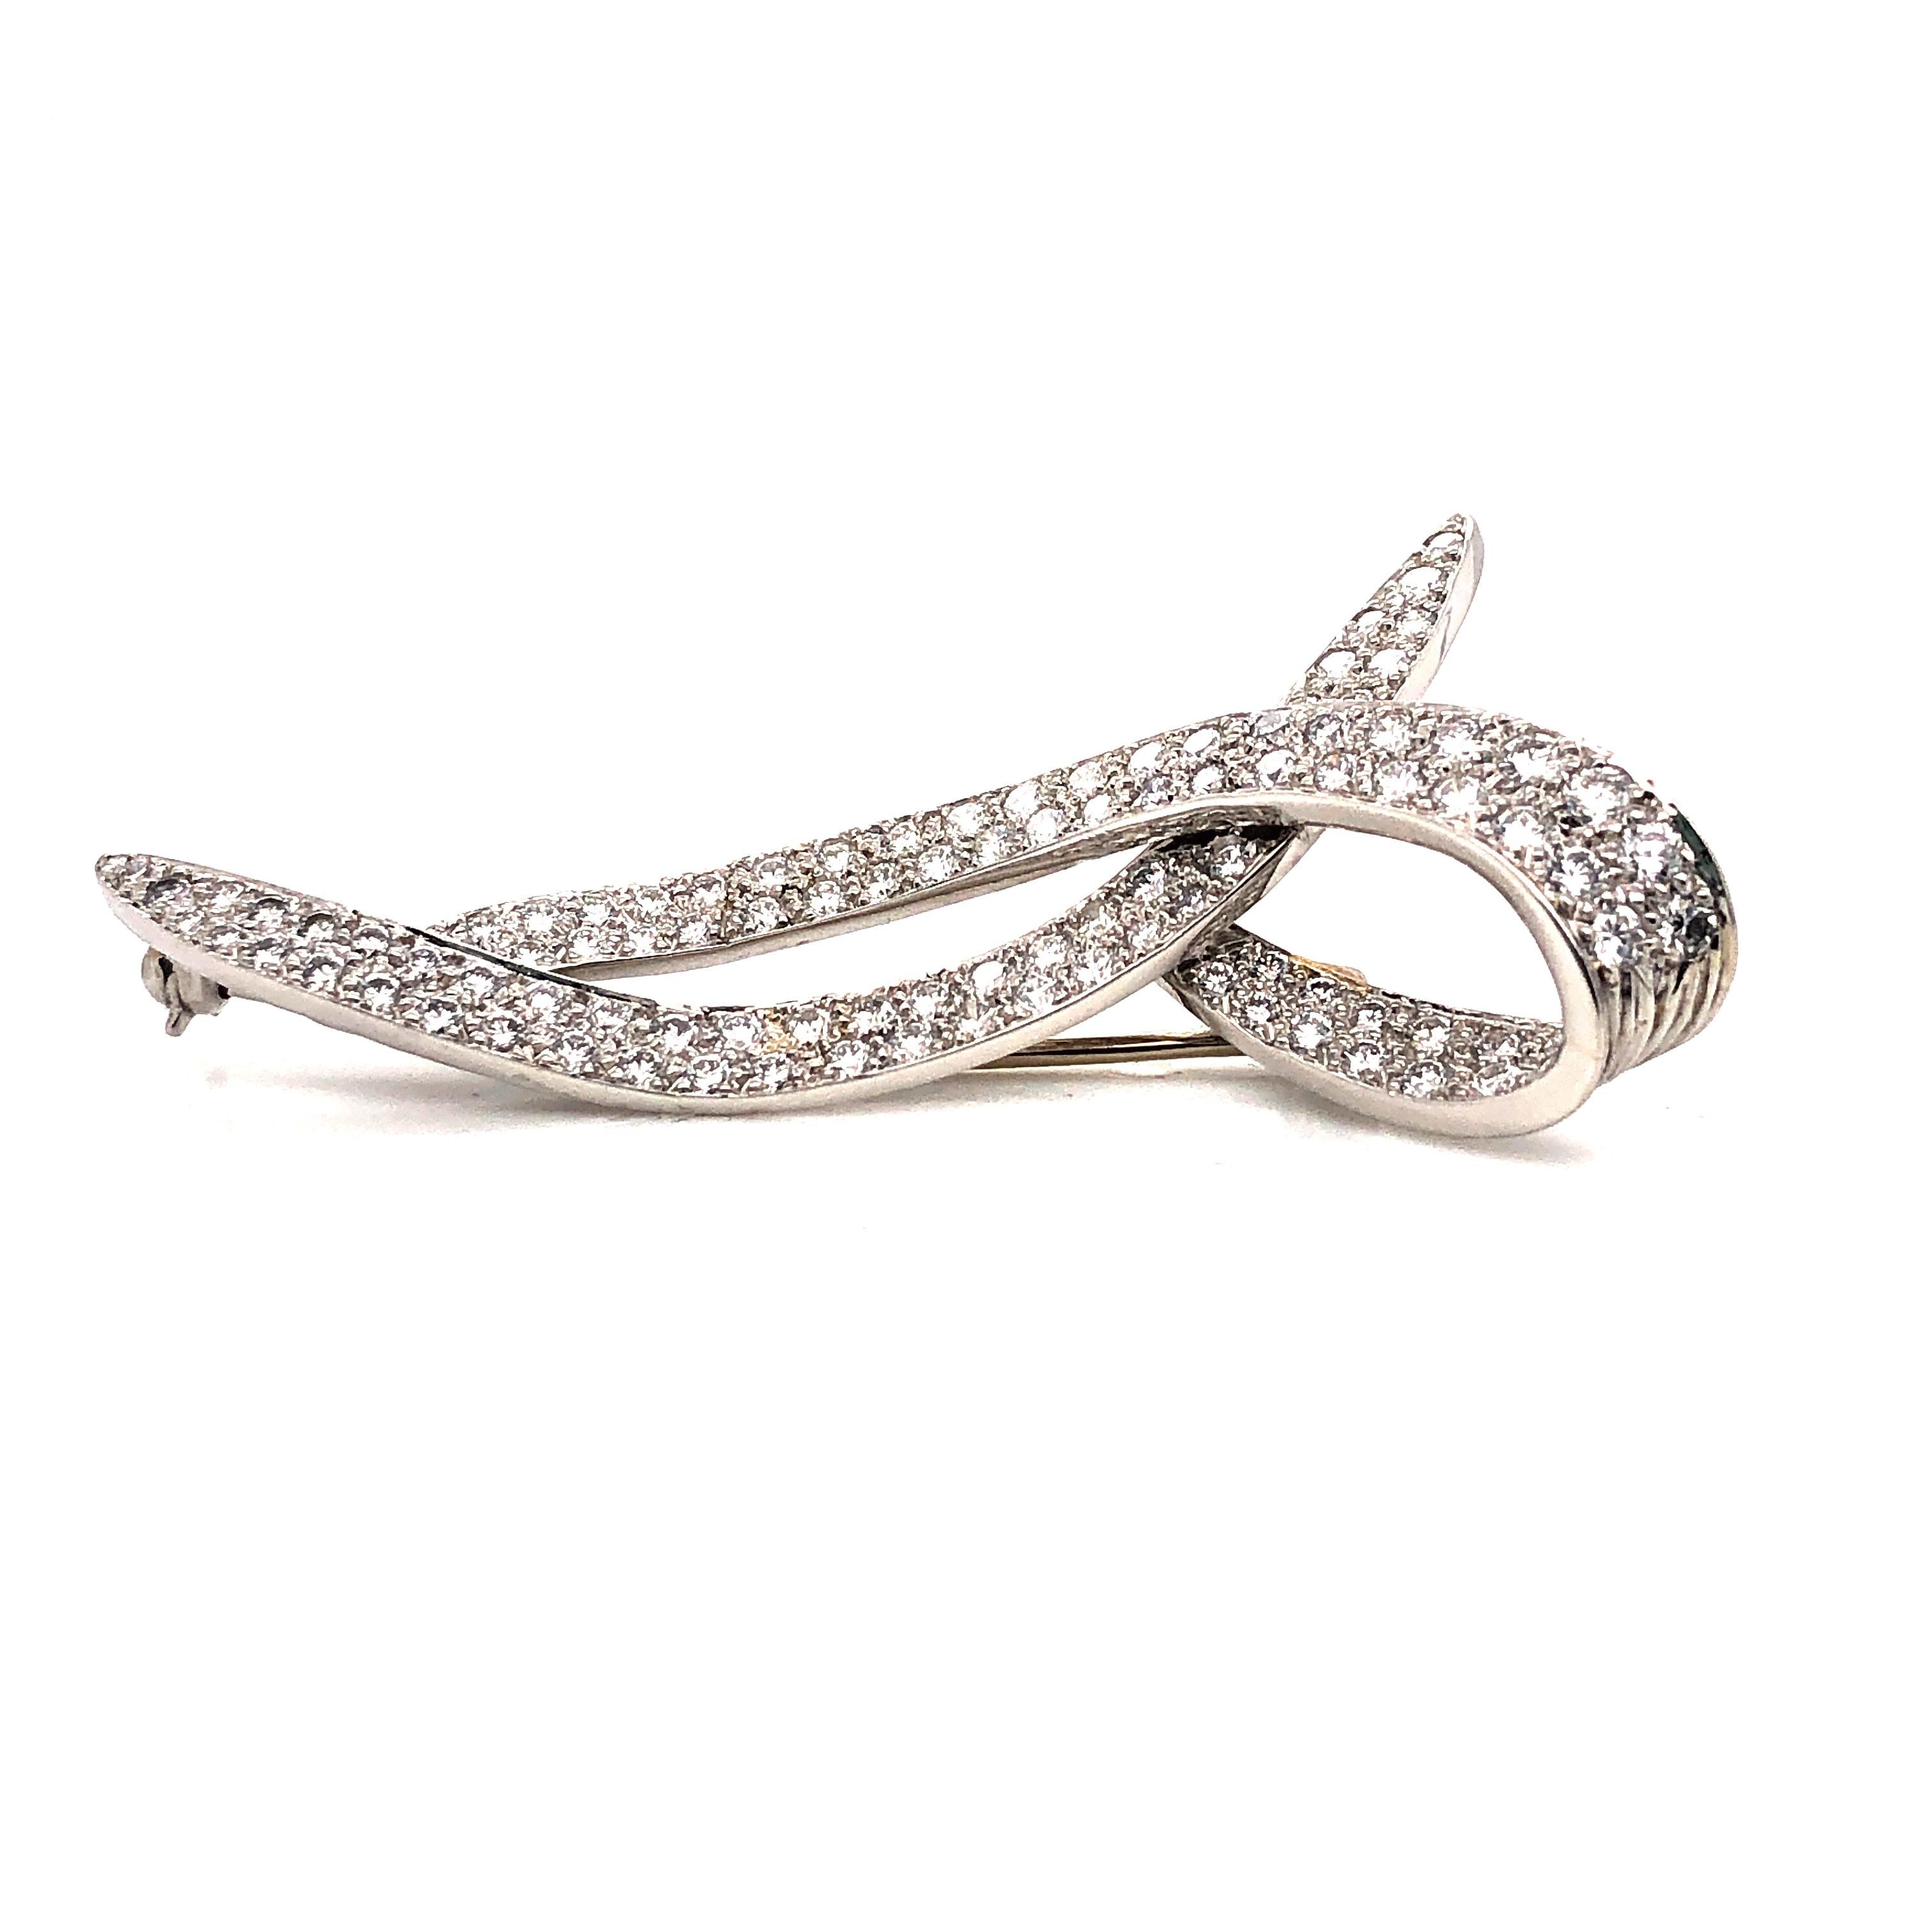 Oscar Heyman platinum bow brooch contains 39 round diamonds weighing 3.56cts (F-G/VS+). It is stamped with the makers mark, PLAT, and serial number 74974.

Brooch measures 2.5inches in length by 1 inch at widest.

Oscar Heyman was founded in 1912